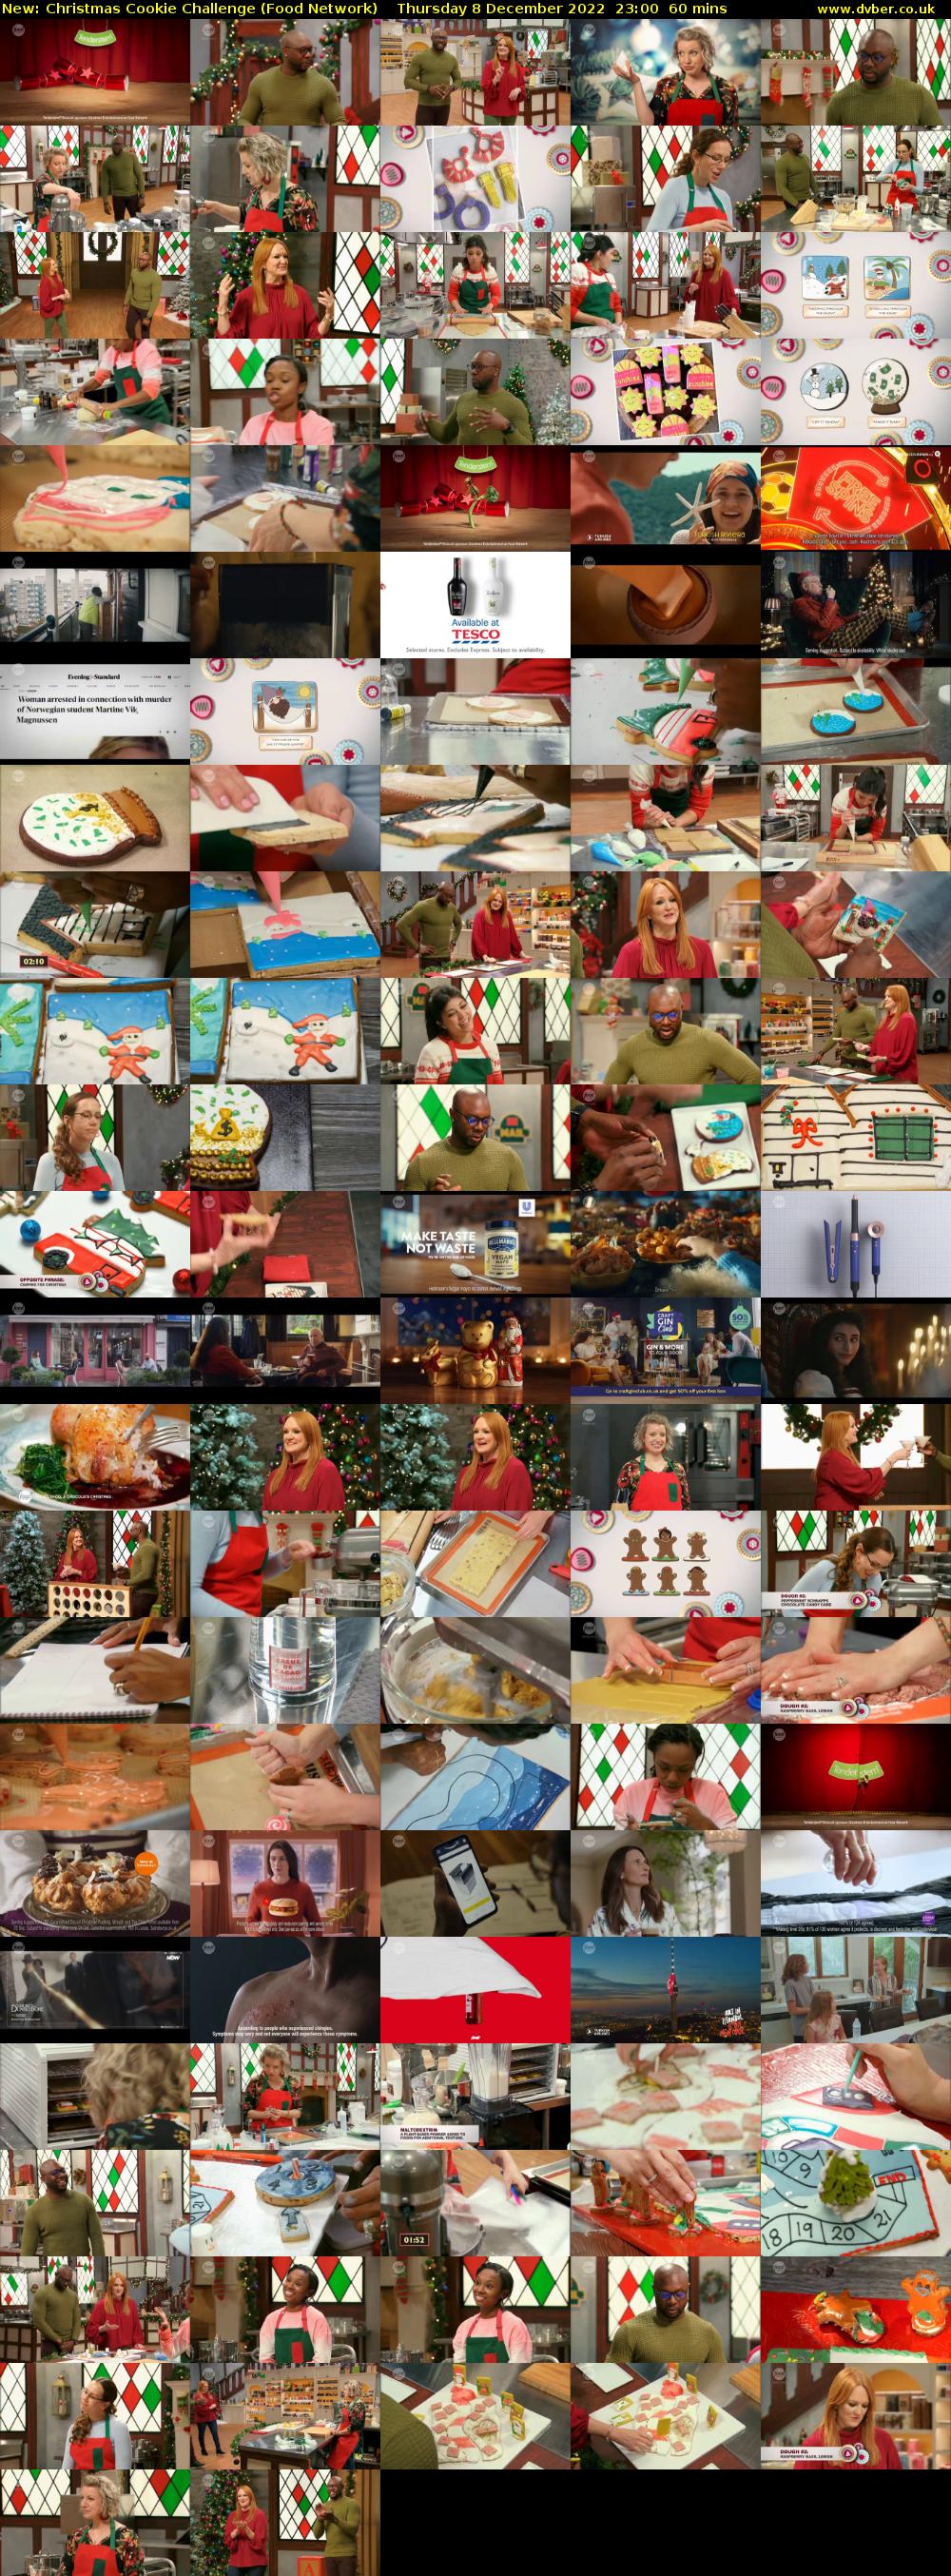 Christmas Cookie Challenge (Food Network) Thursday 8 December 2022 23:00 - 00:00